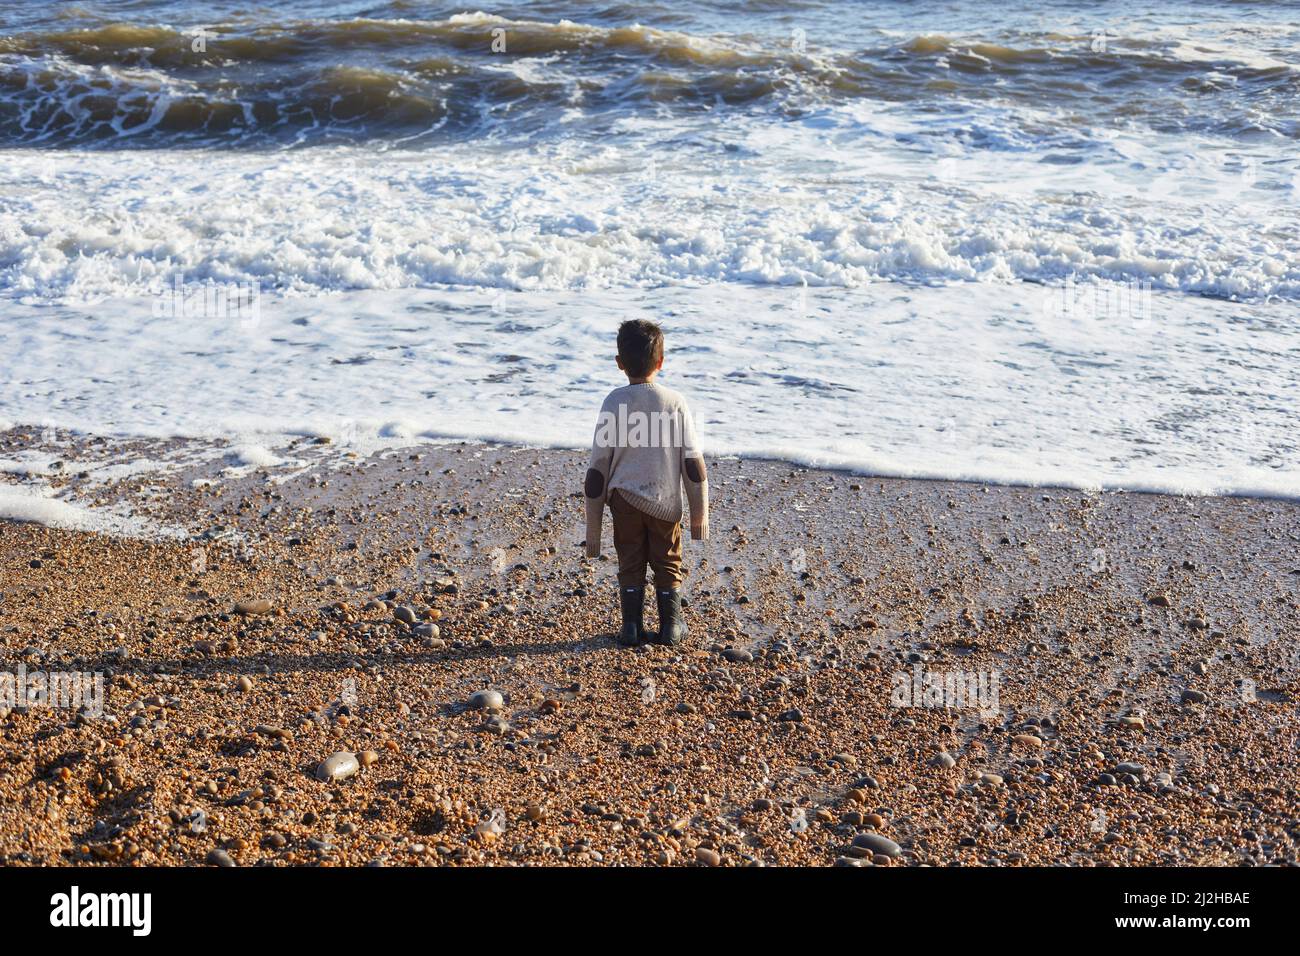 UK, Devon, Rear view of boy in oversized sweater looking at sea waves Stock Photo